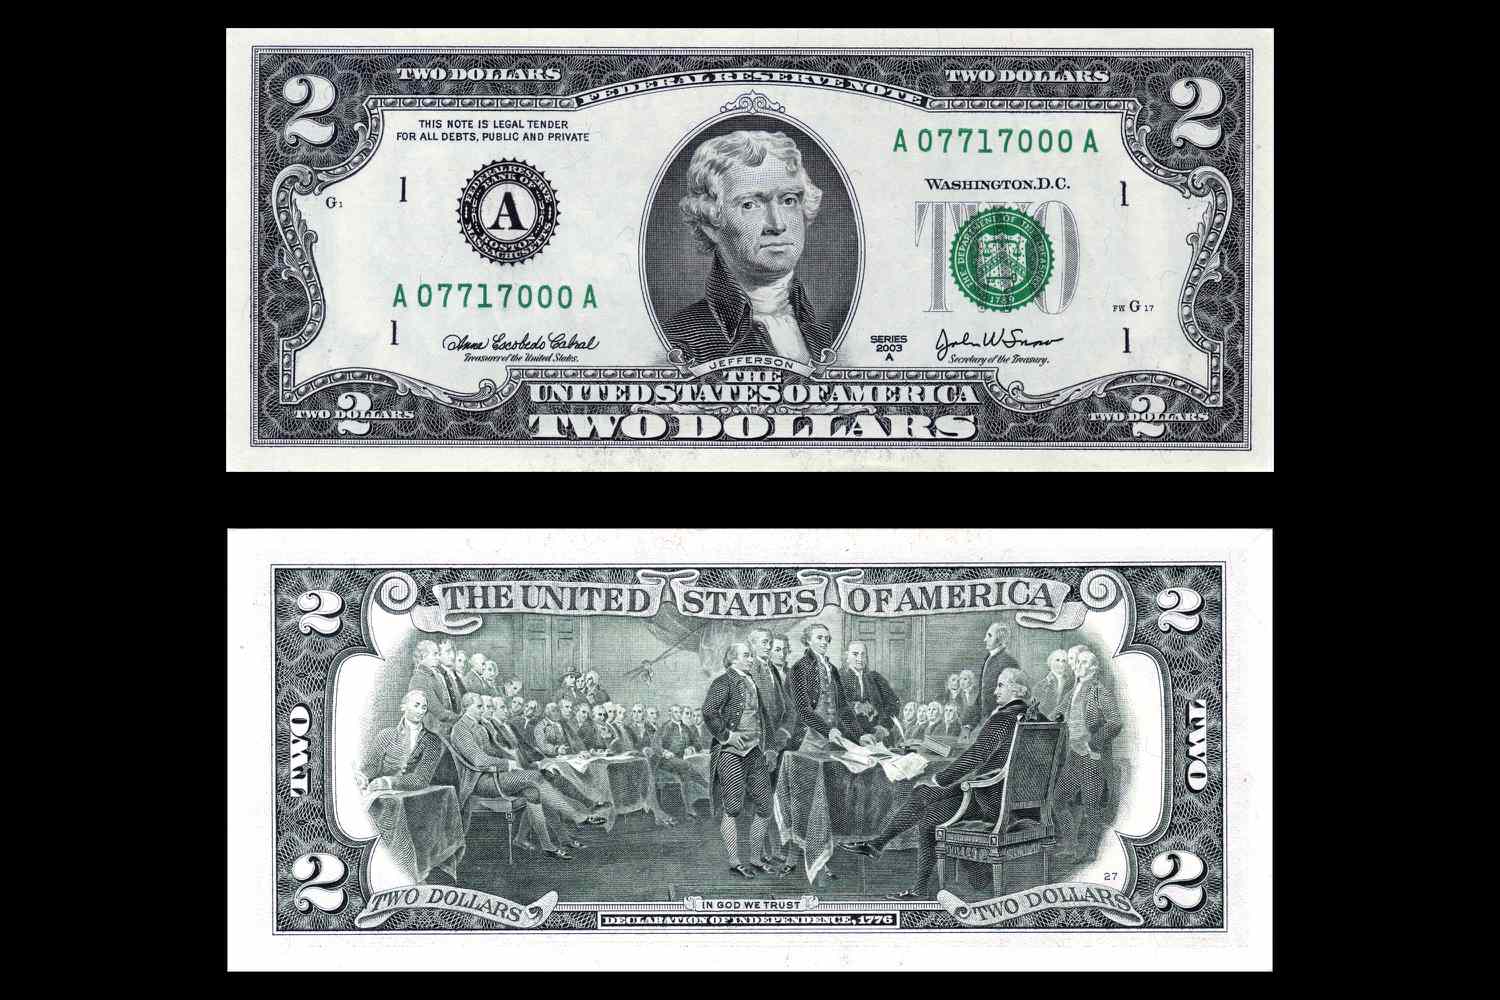 2 dollar bill front and back